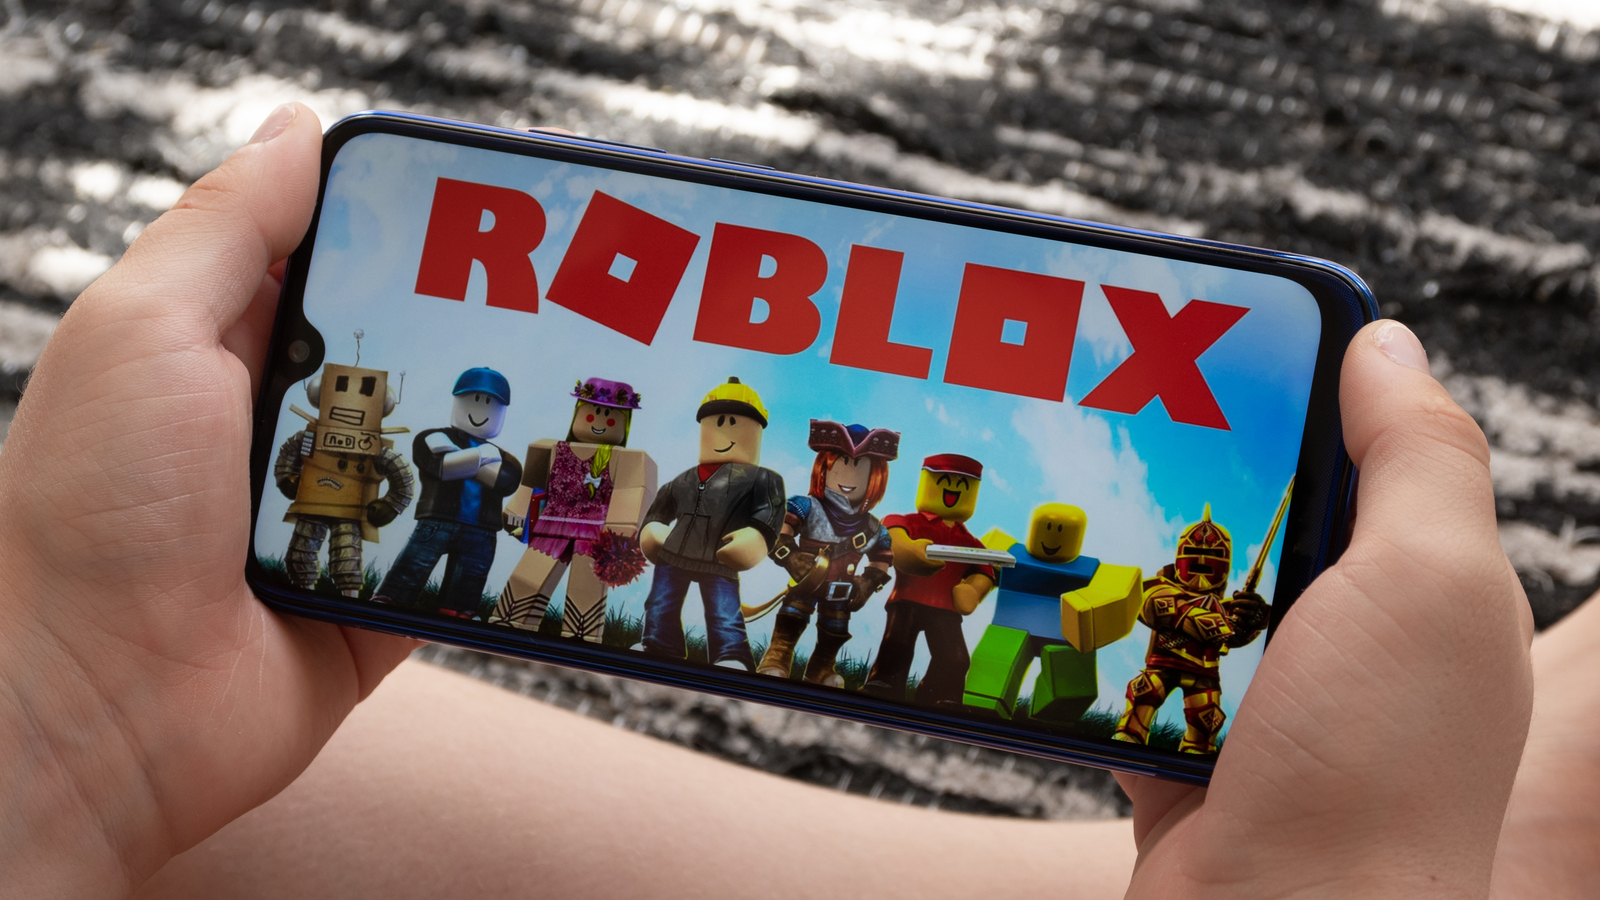 Scratch The Robux Fun – Apps no Google Play